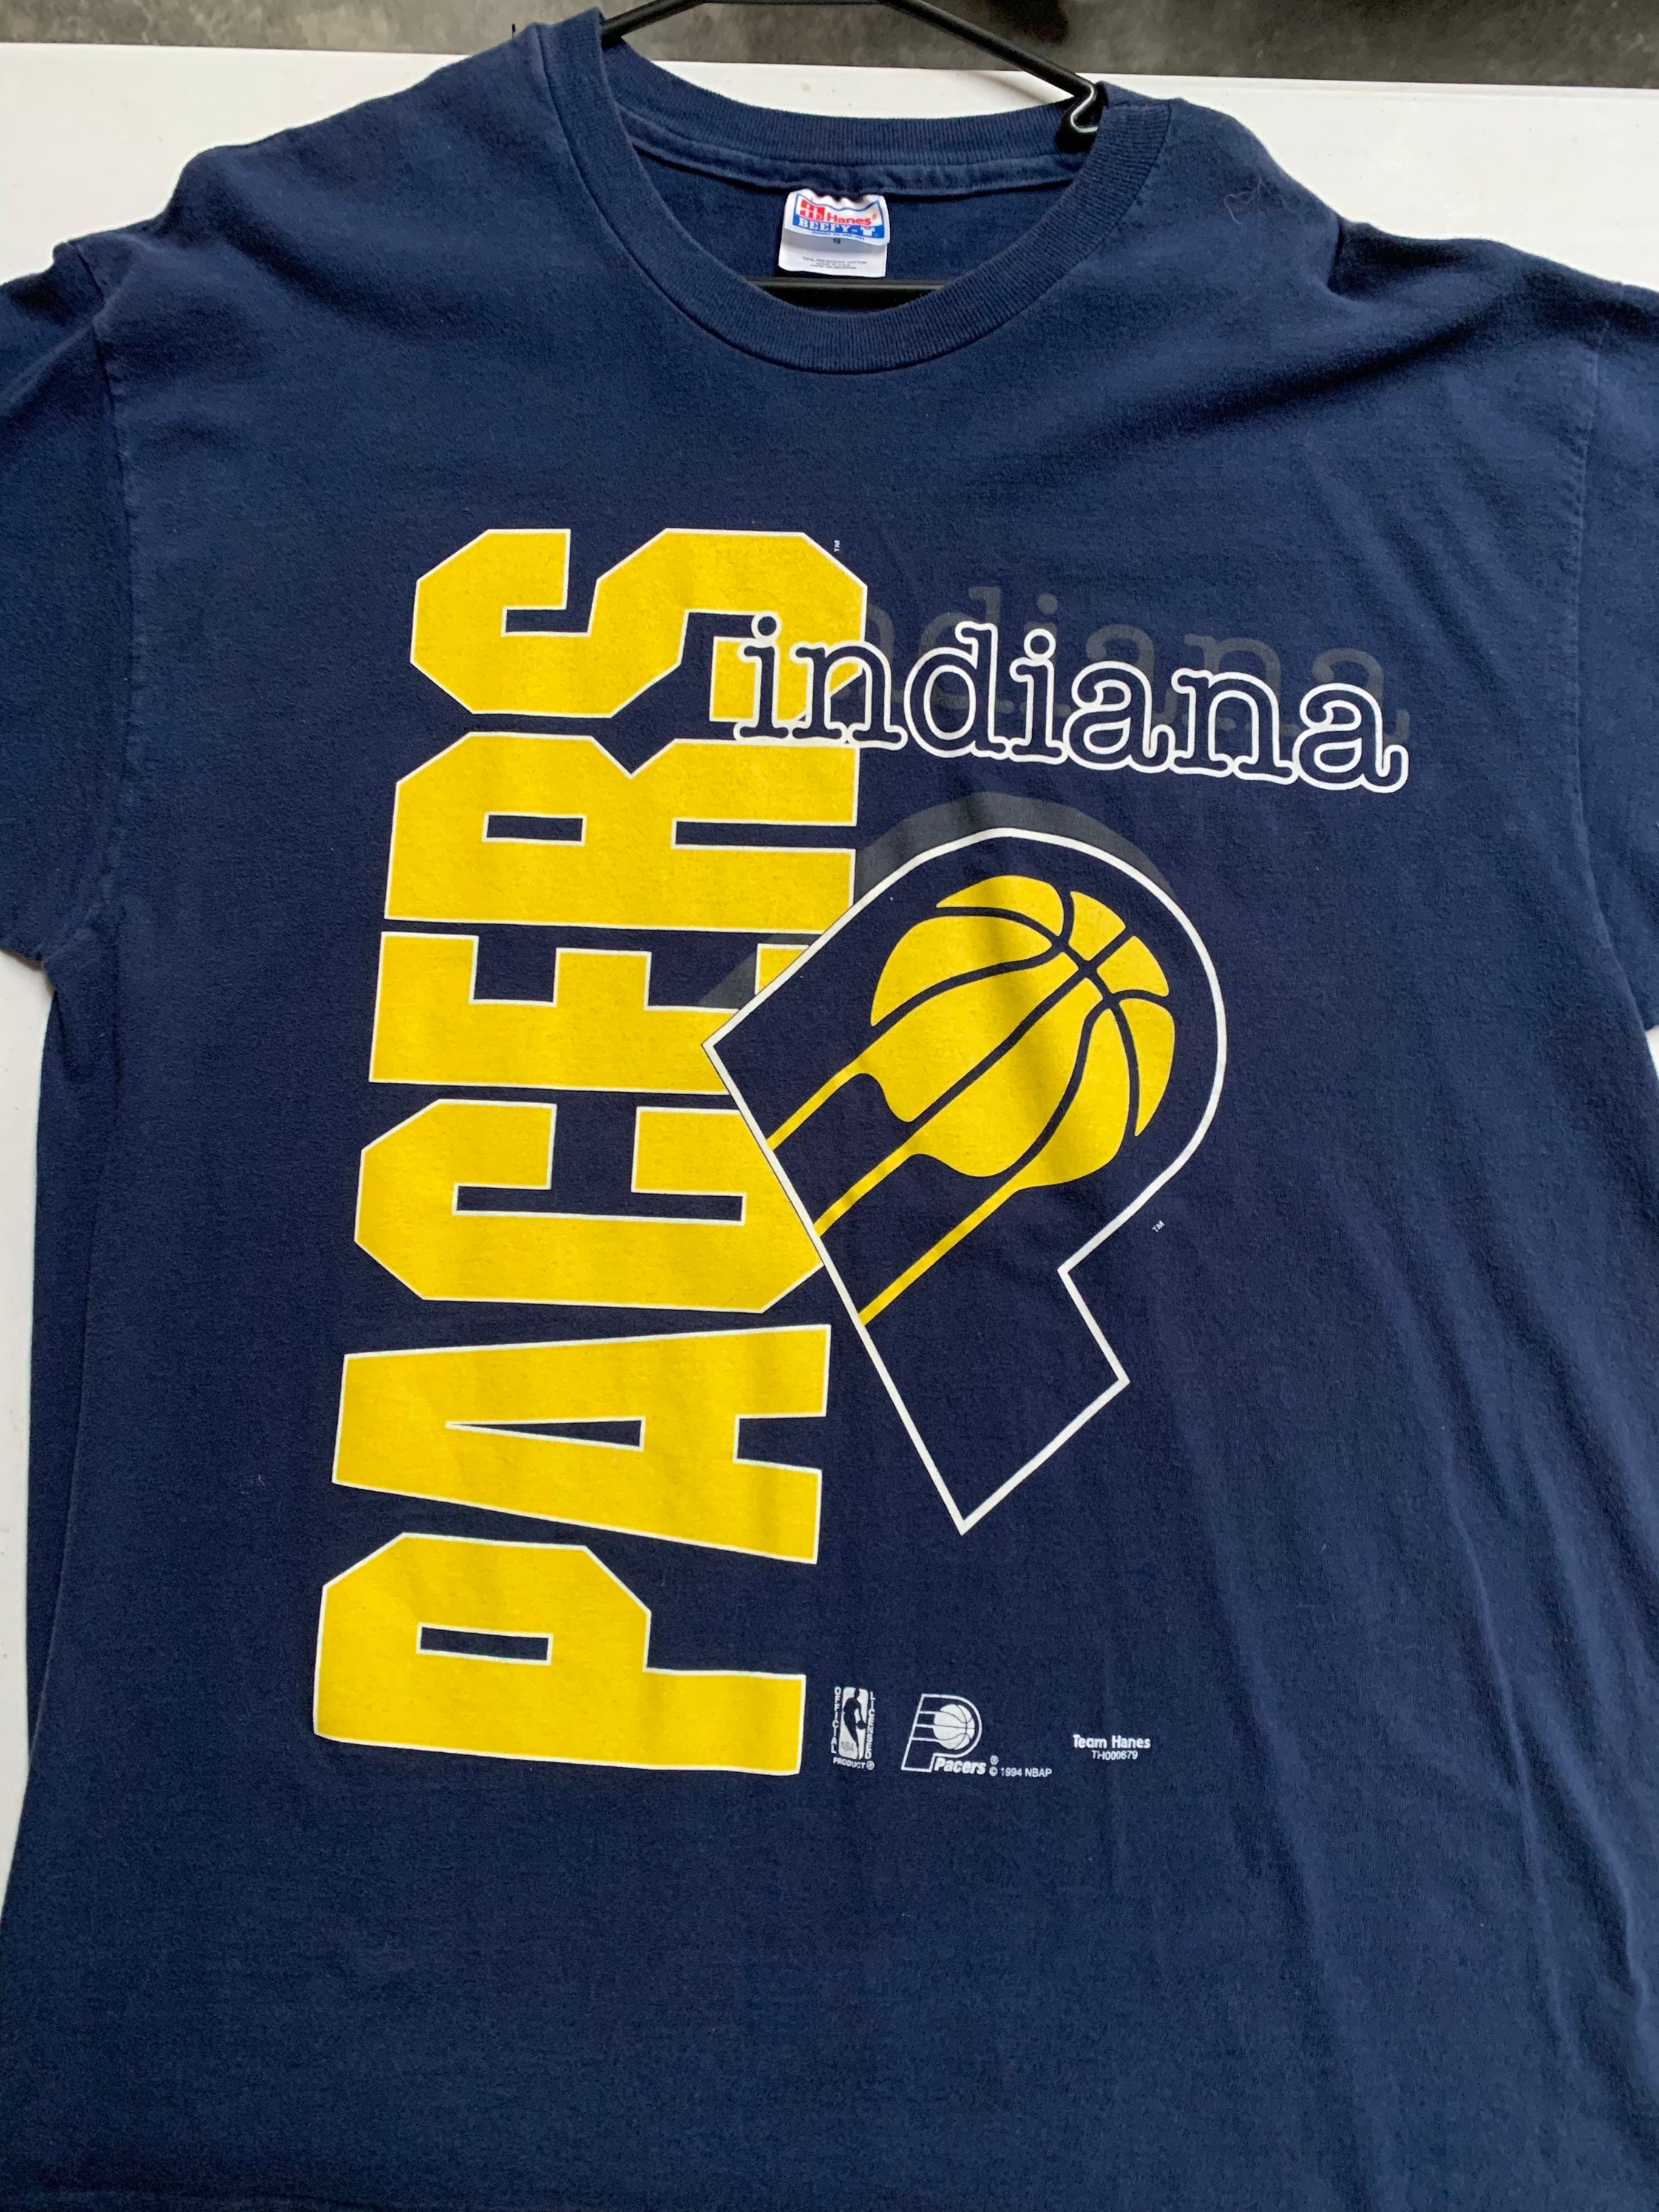 Vintage Indiana Pacers T Shirt Quality Made in USA Huge | Etsy